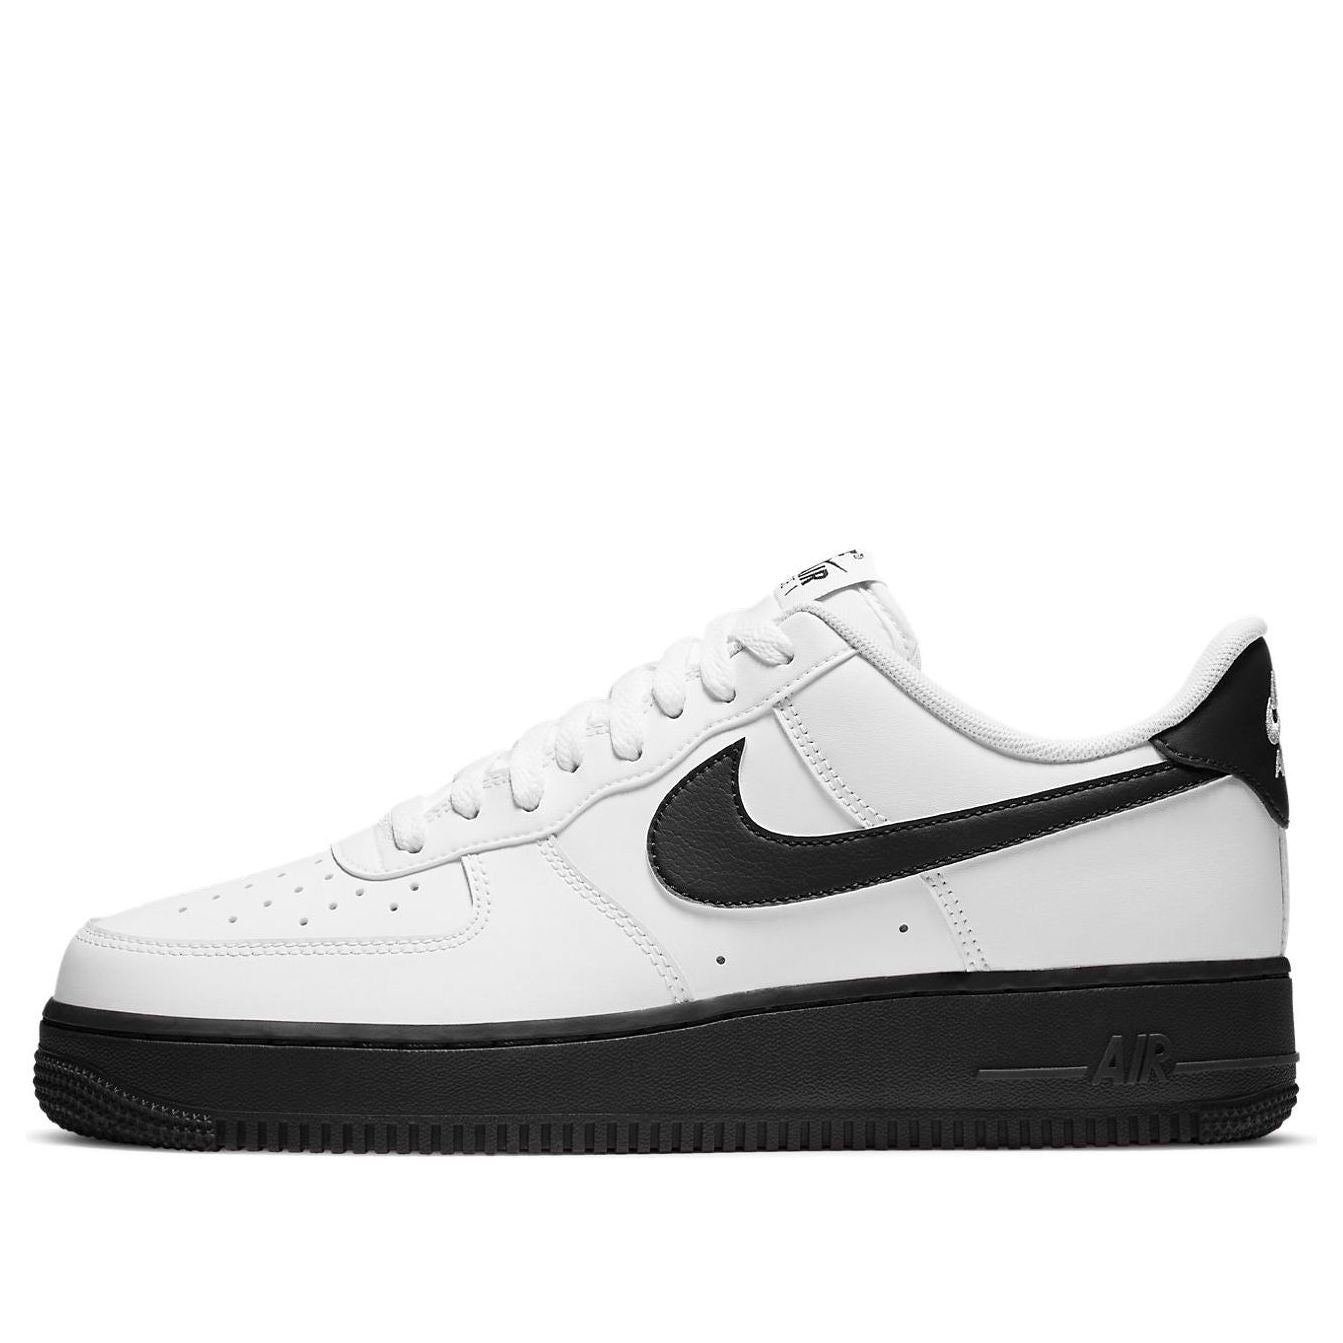 Nike Air Force 1 Low 'White Black Sole' CK7663-101